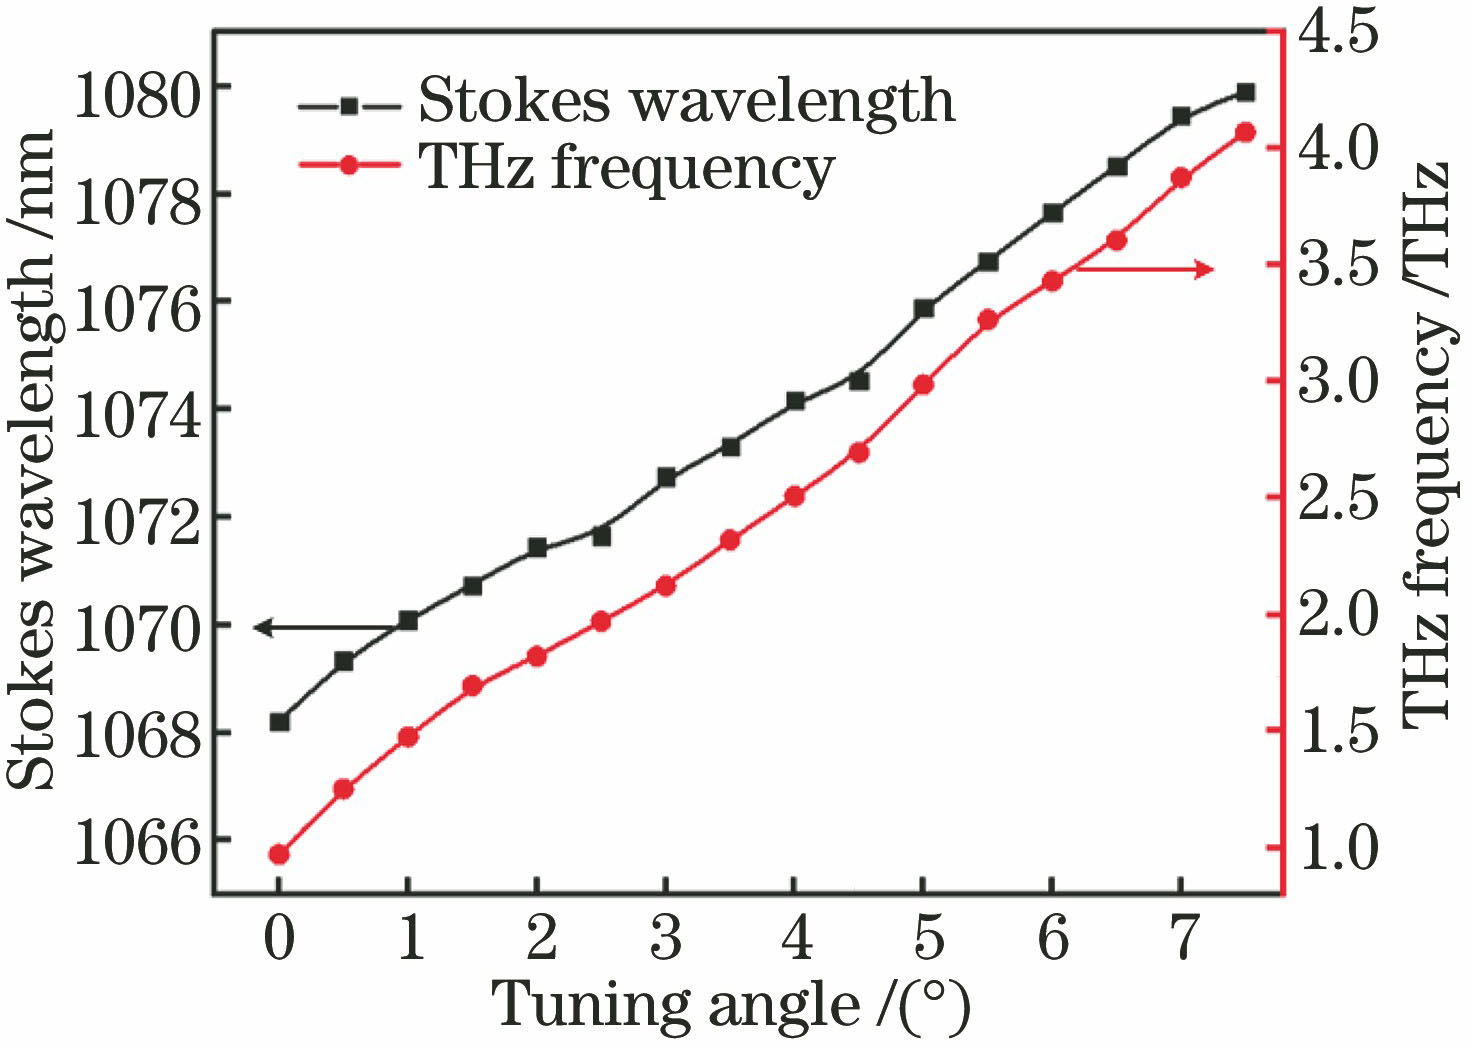 Tuning characteristics of THz wave and Stokes output frequency in ips-TPG